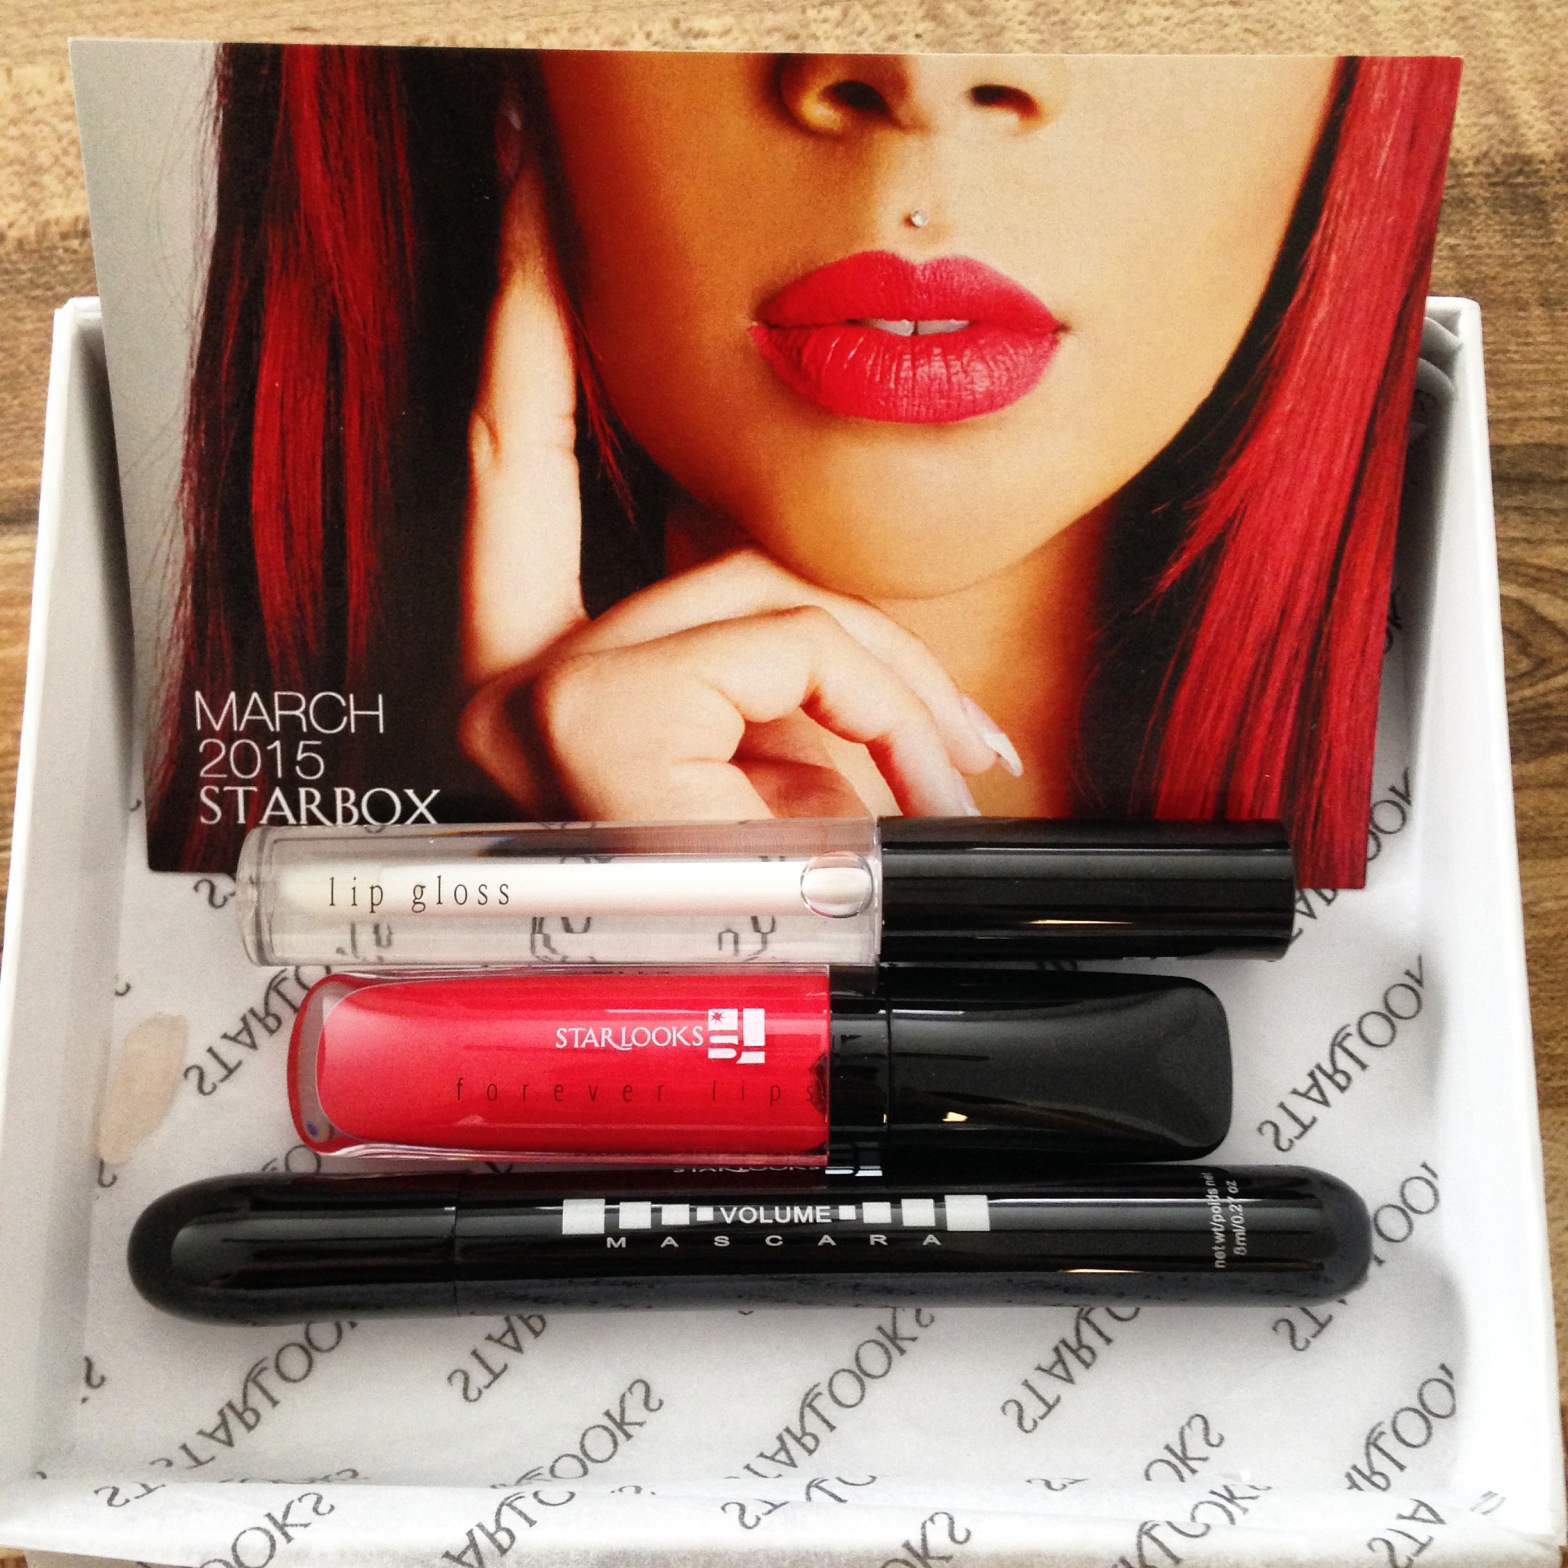 Review of Starbox March 2015 from Starlooks Cosmetics written by Feliza Casano